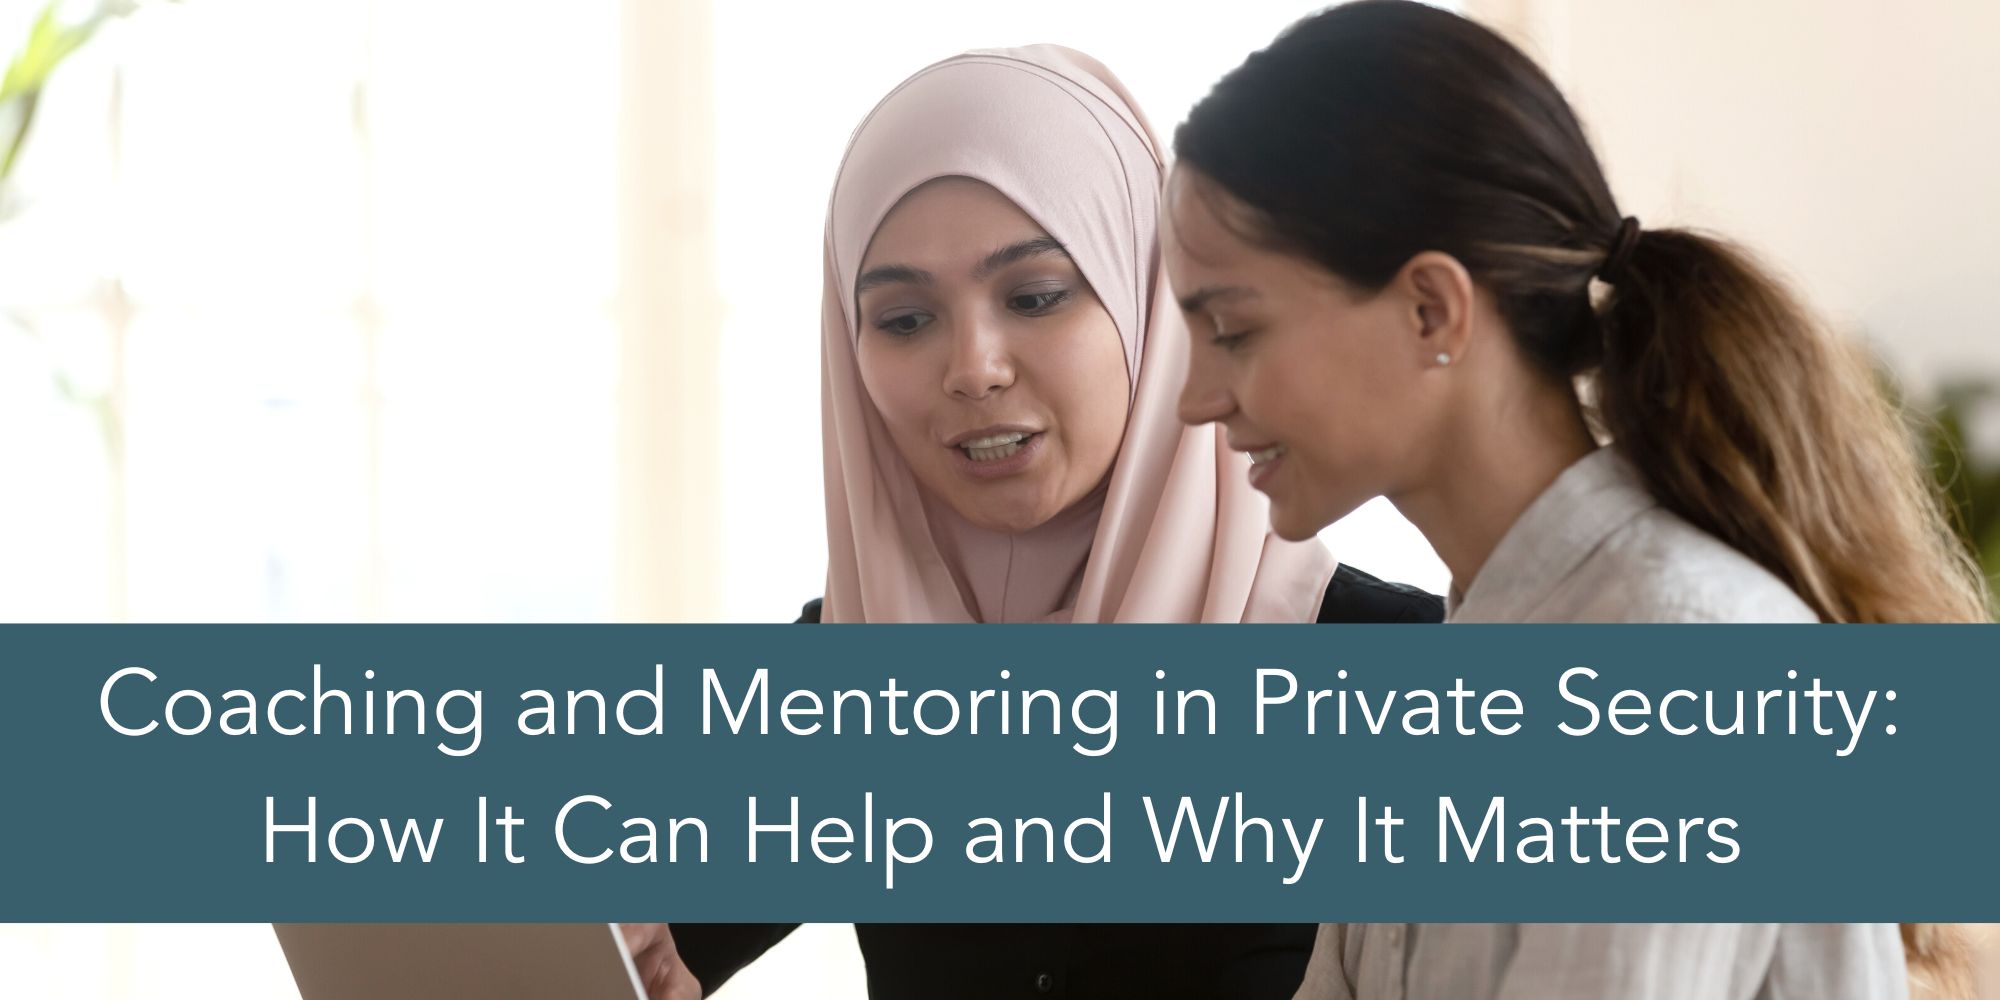 Coaching and Mentoring in Private Security